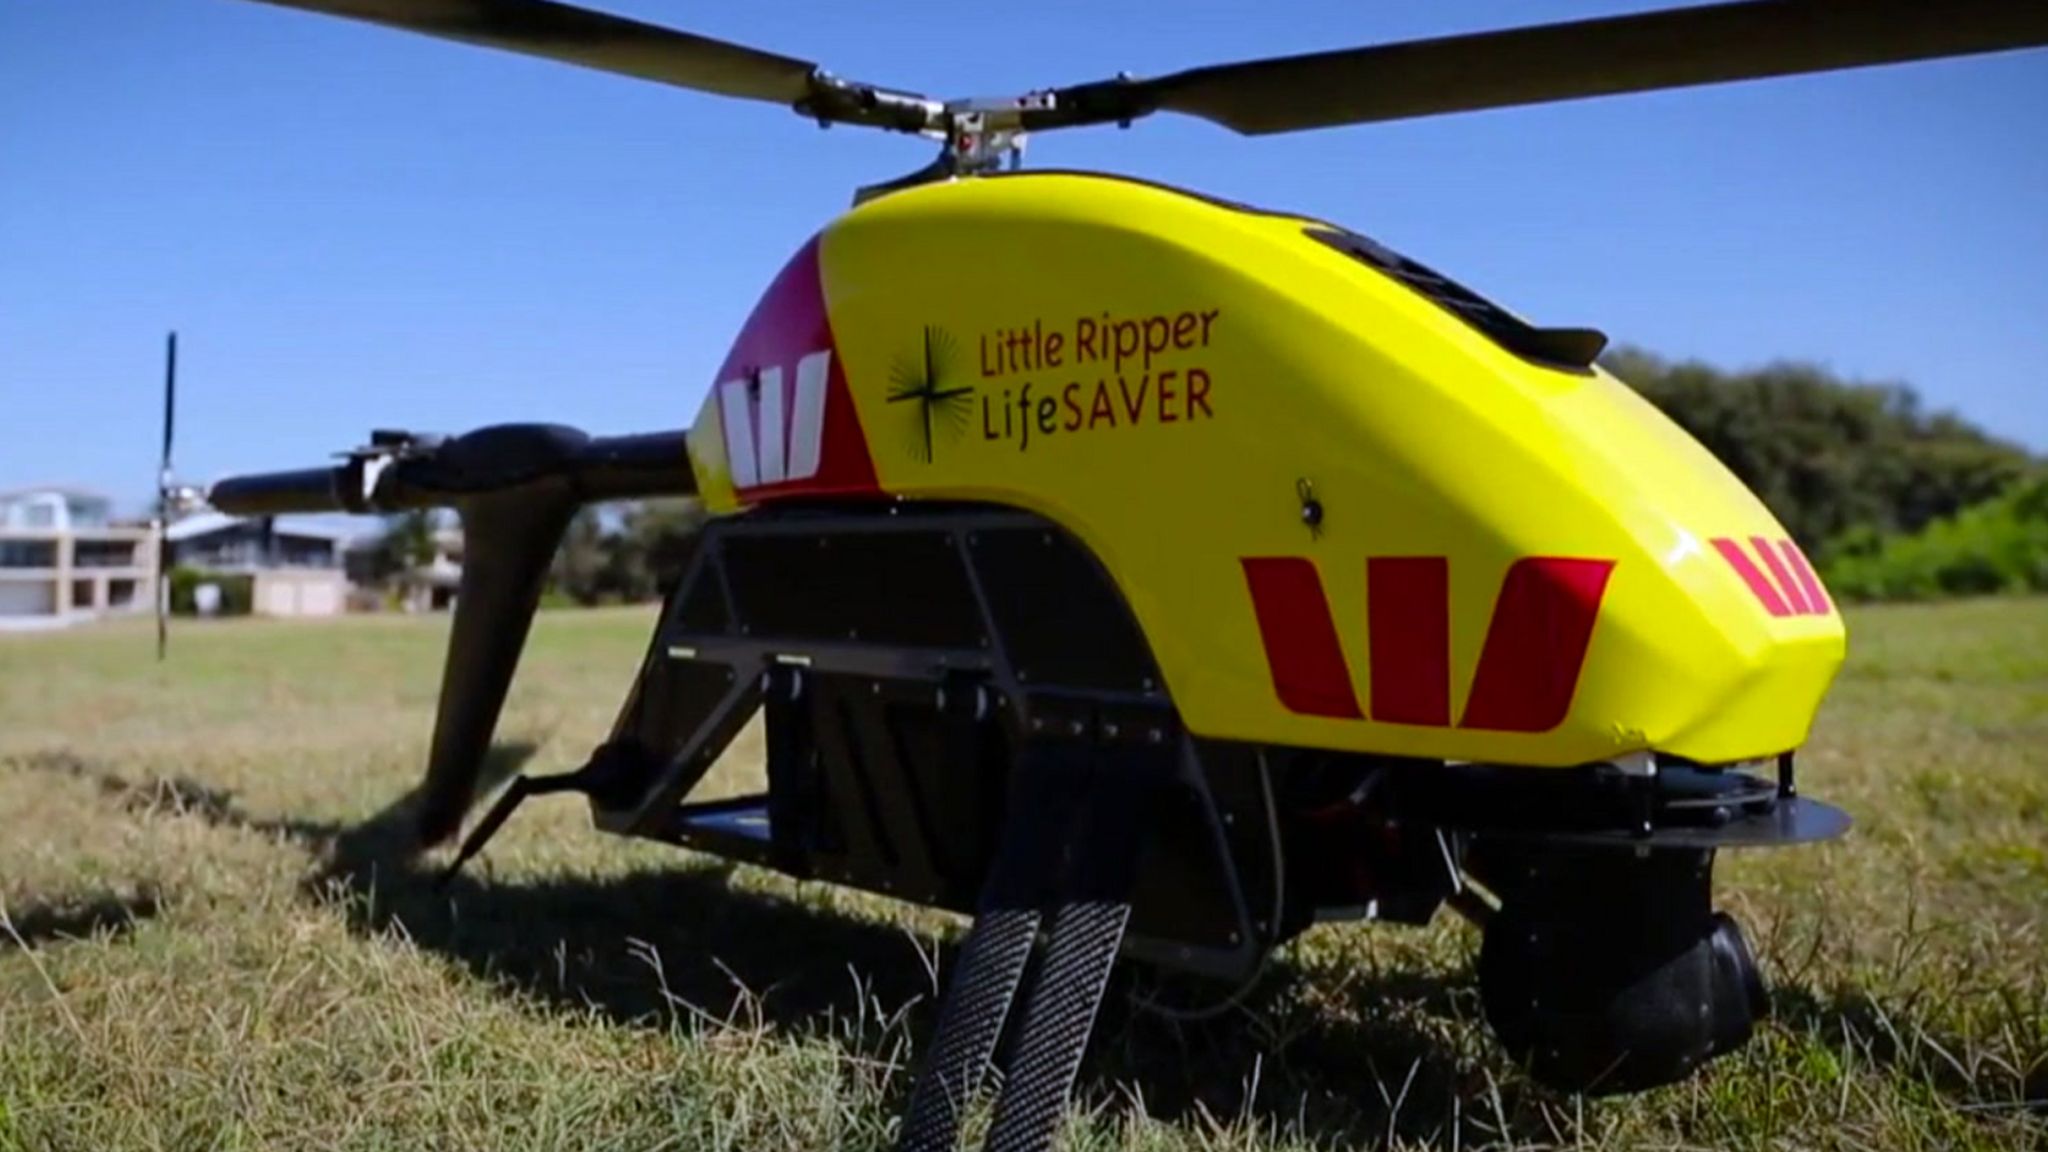 A drone which can spot sharks and deploy life-saving equipment